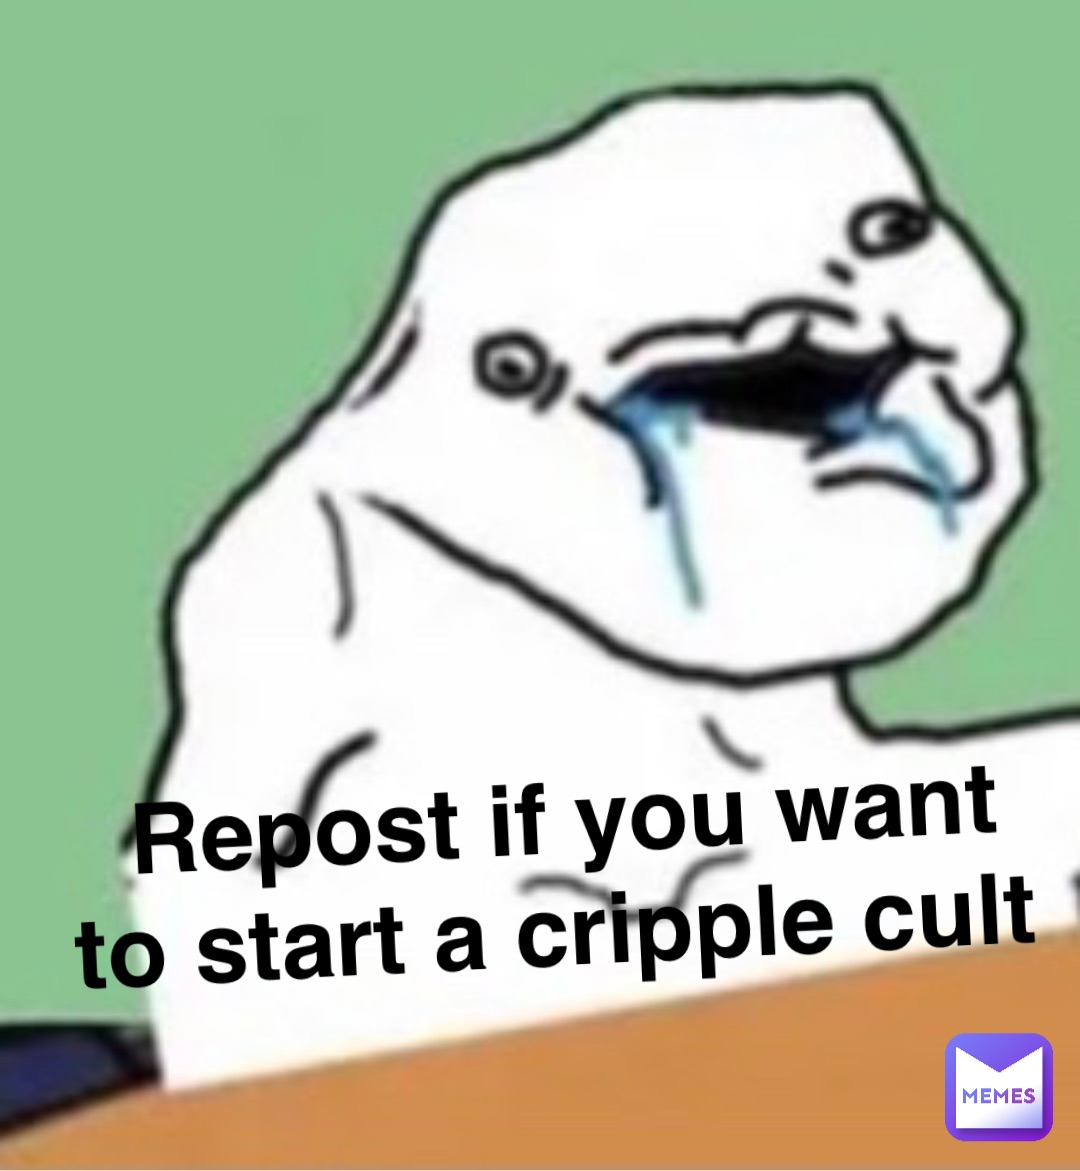 Repost if you want to start a cripple cult